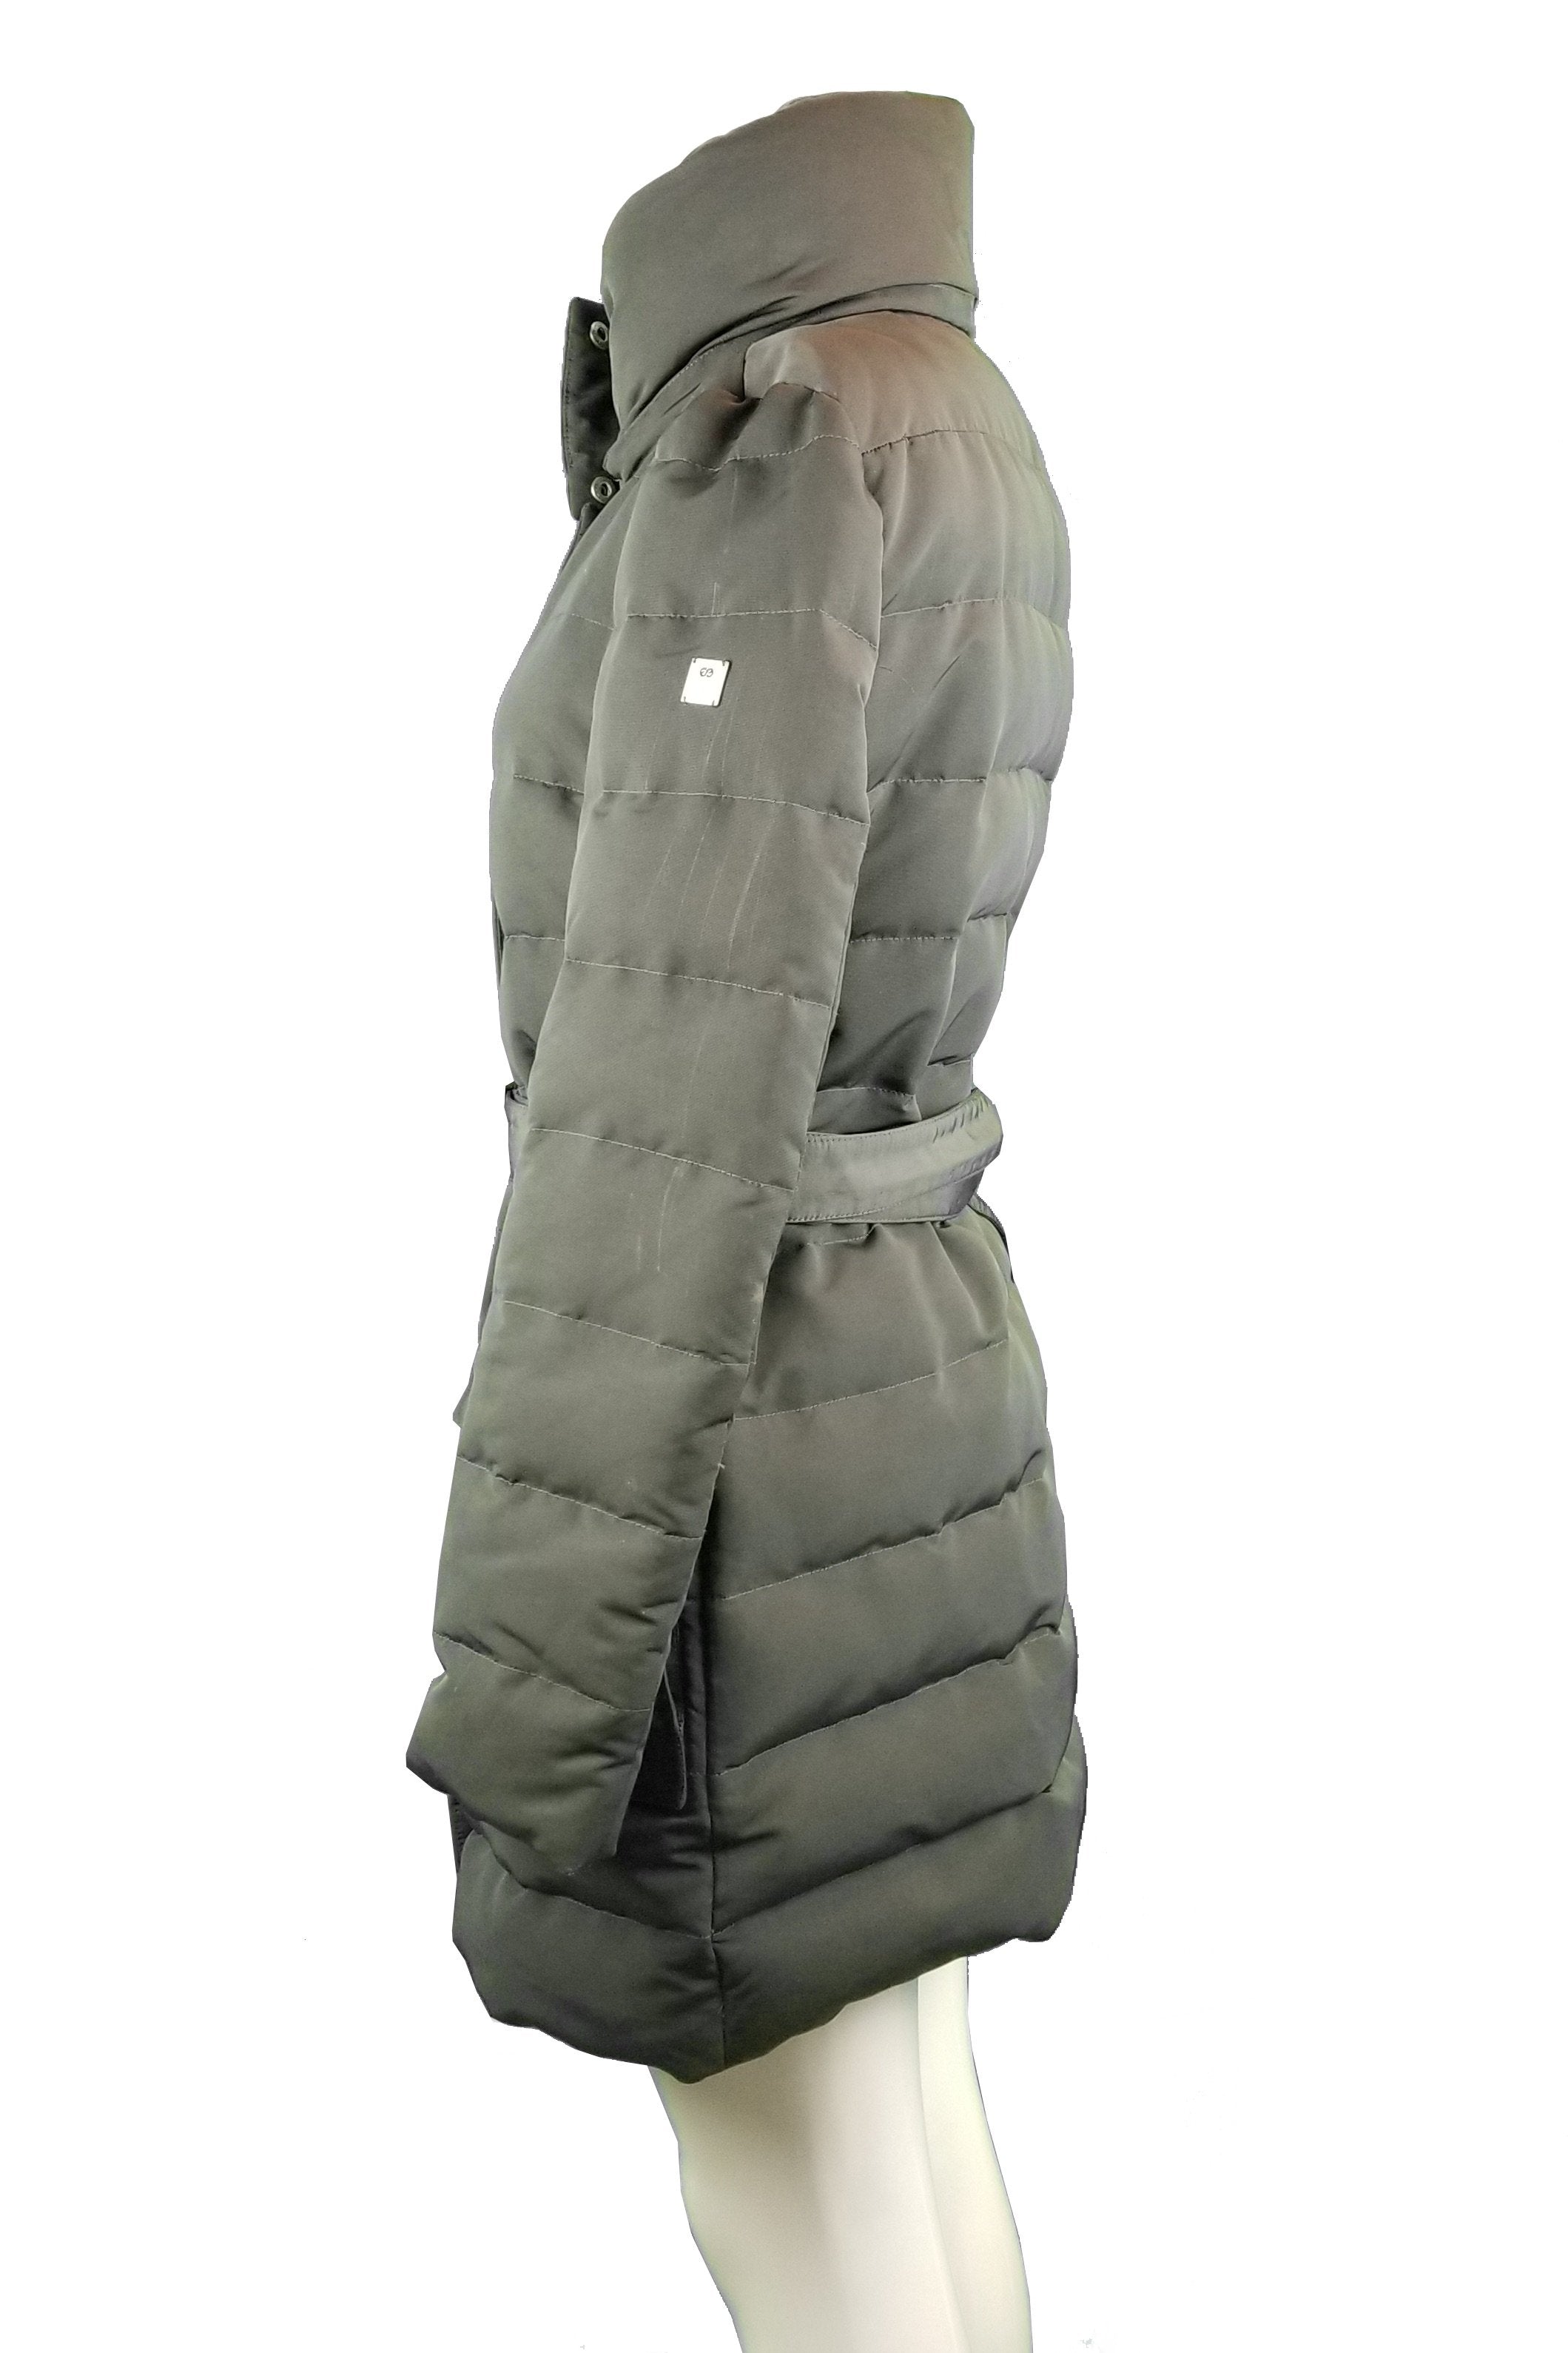 Escada Sport Down Jacket, Dressing warm doesn't have to be dull! This  winter jacket will keep you away from the cold and make you feel so stylish., Grey, Lining 100% Polyester; filling 70% Goose Down, 30% goose Quill, women's down jacket, women's winter jacket, down jacket, long jacket, warm winter jacket